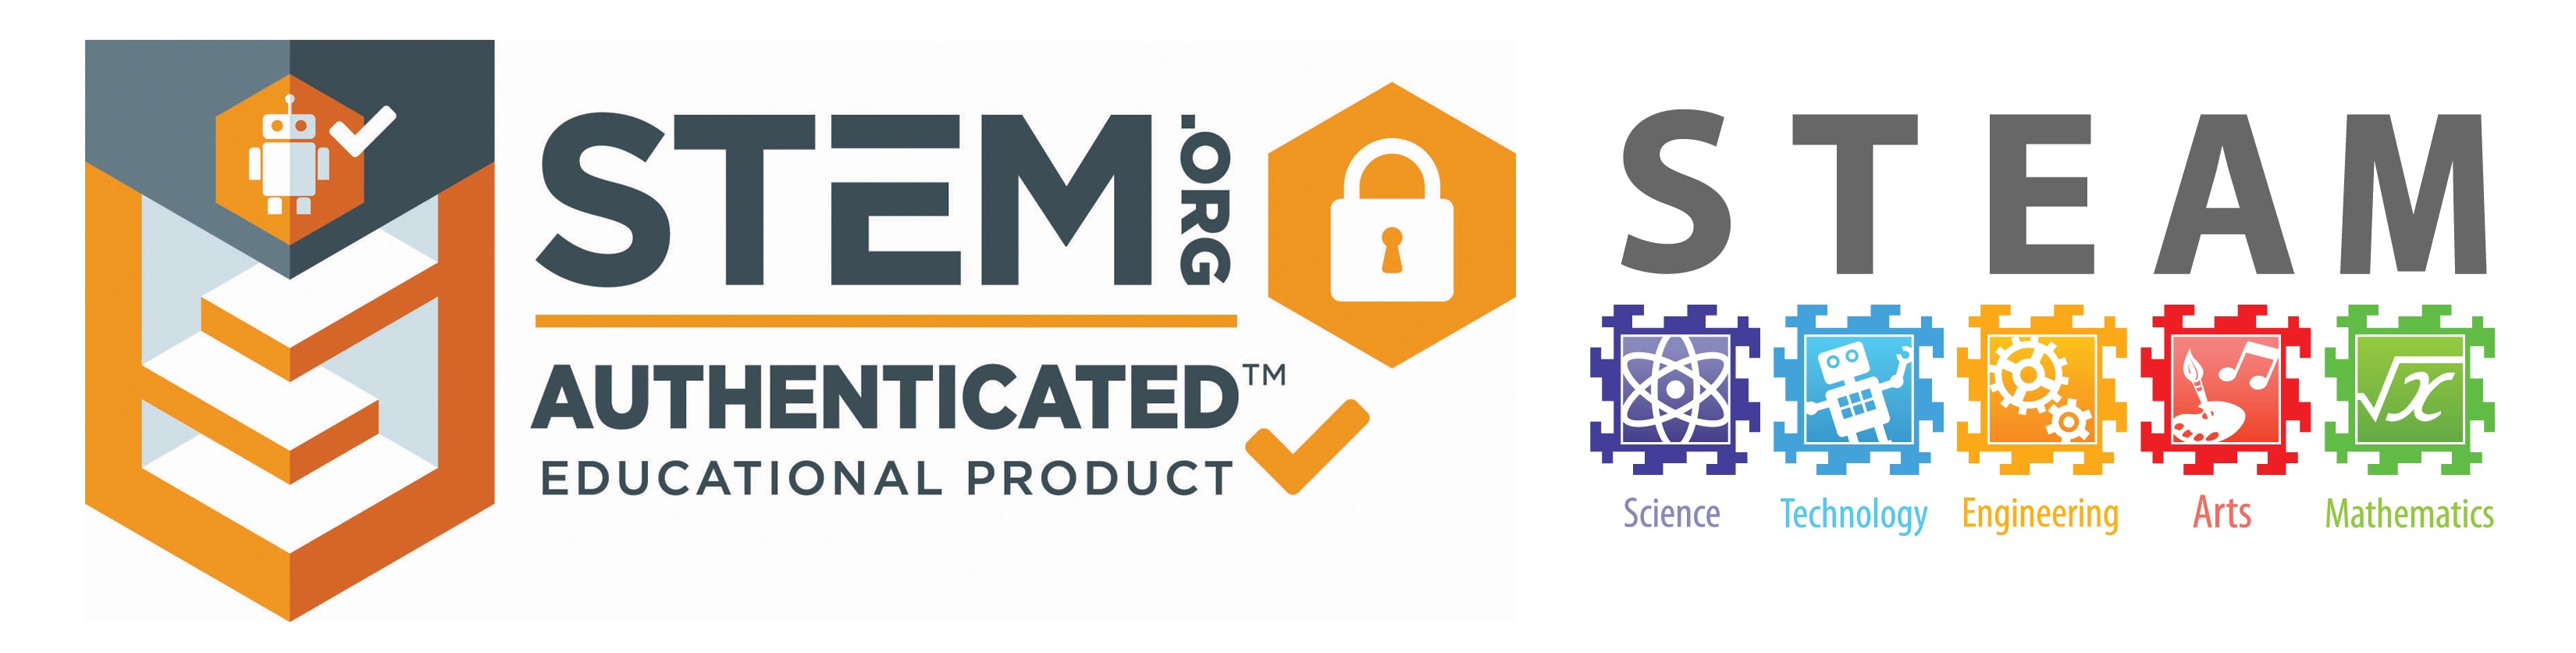 Stem.org Authenticated Educational Product Logo